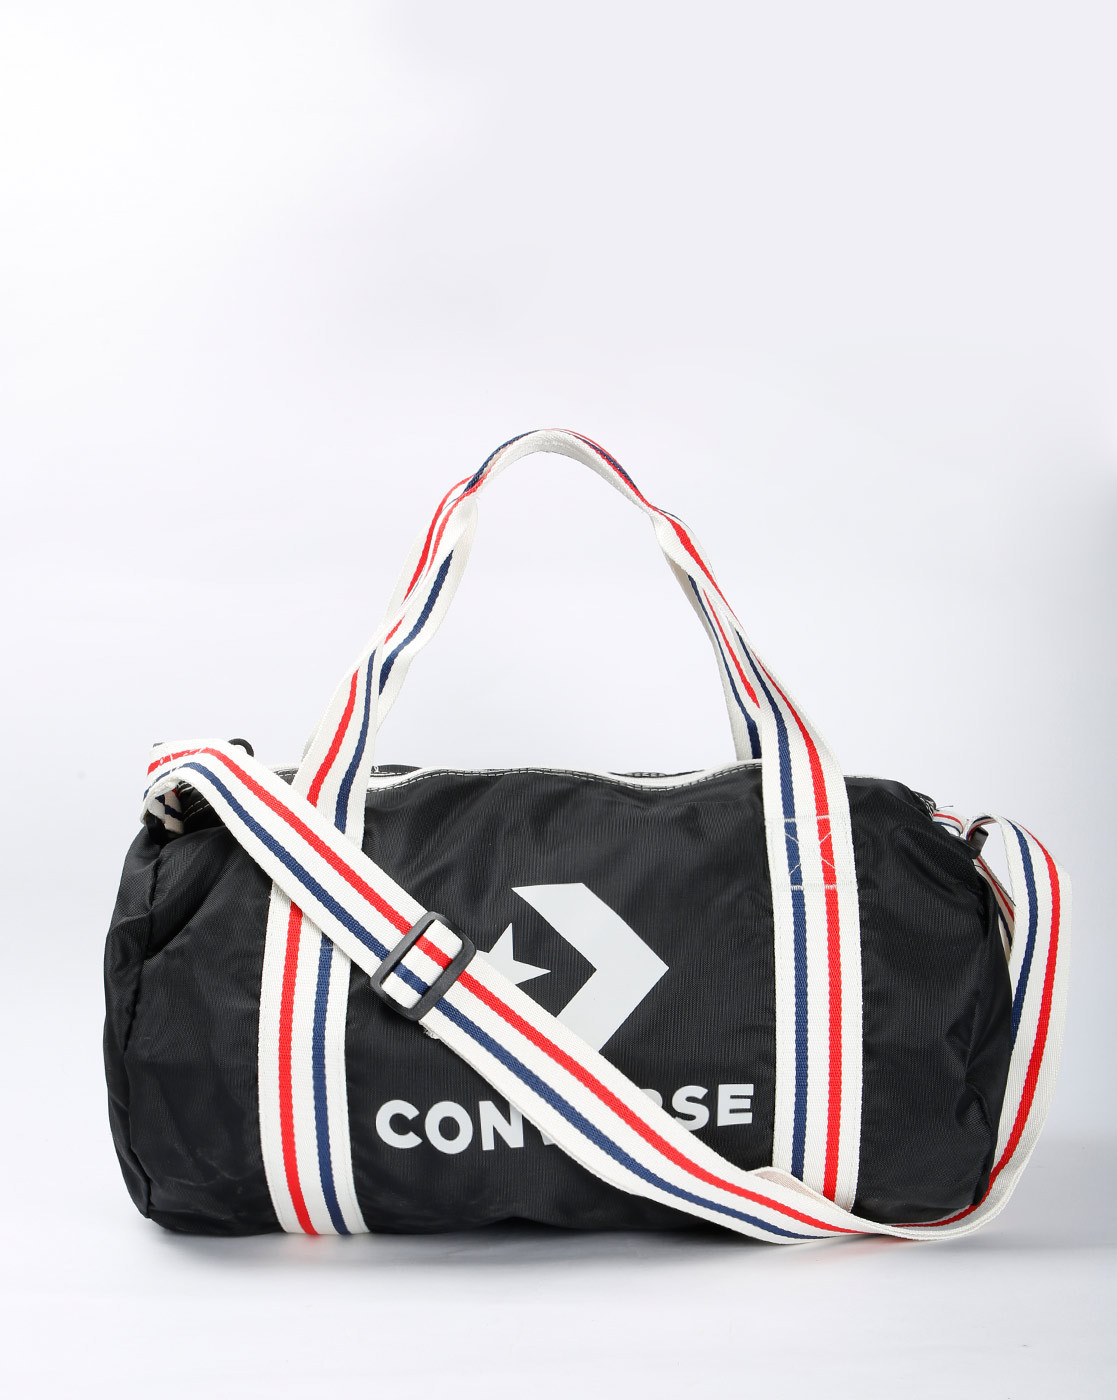 converse gym bags online india